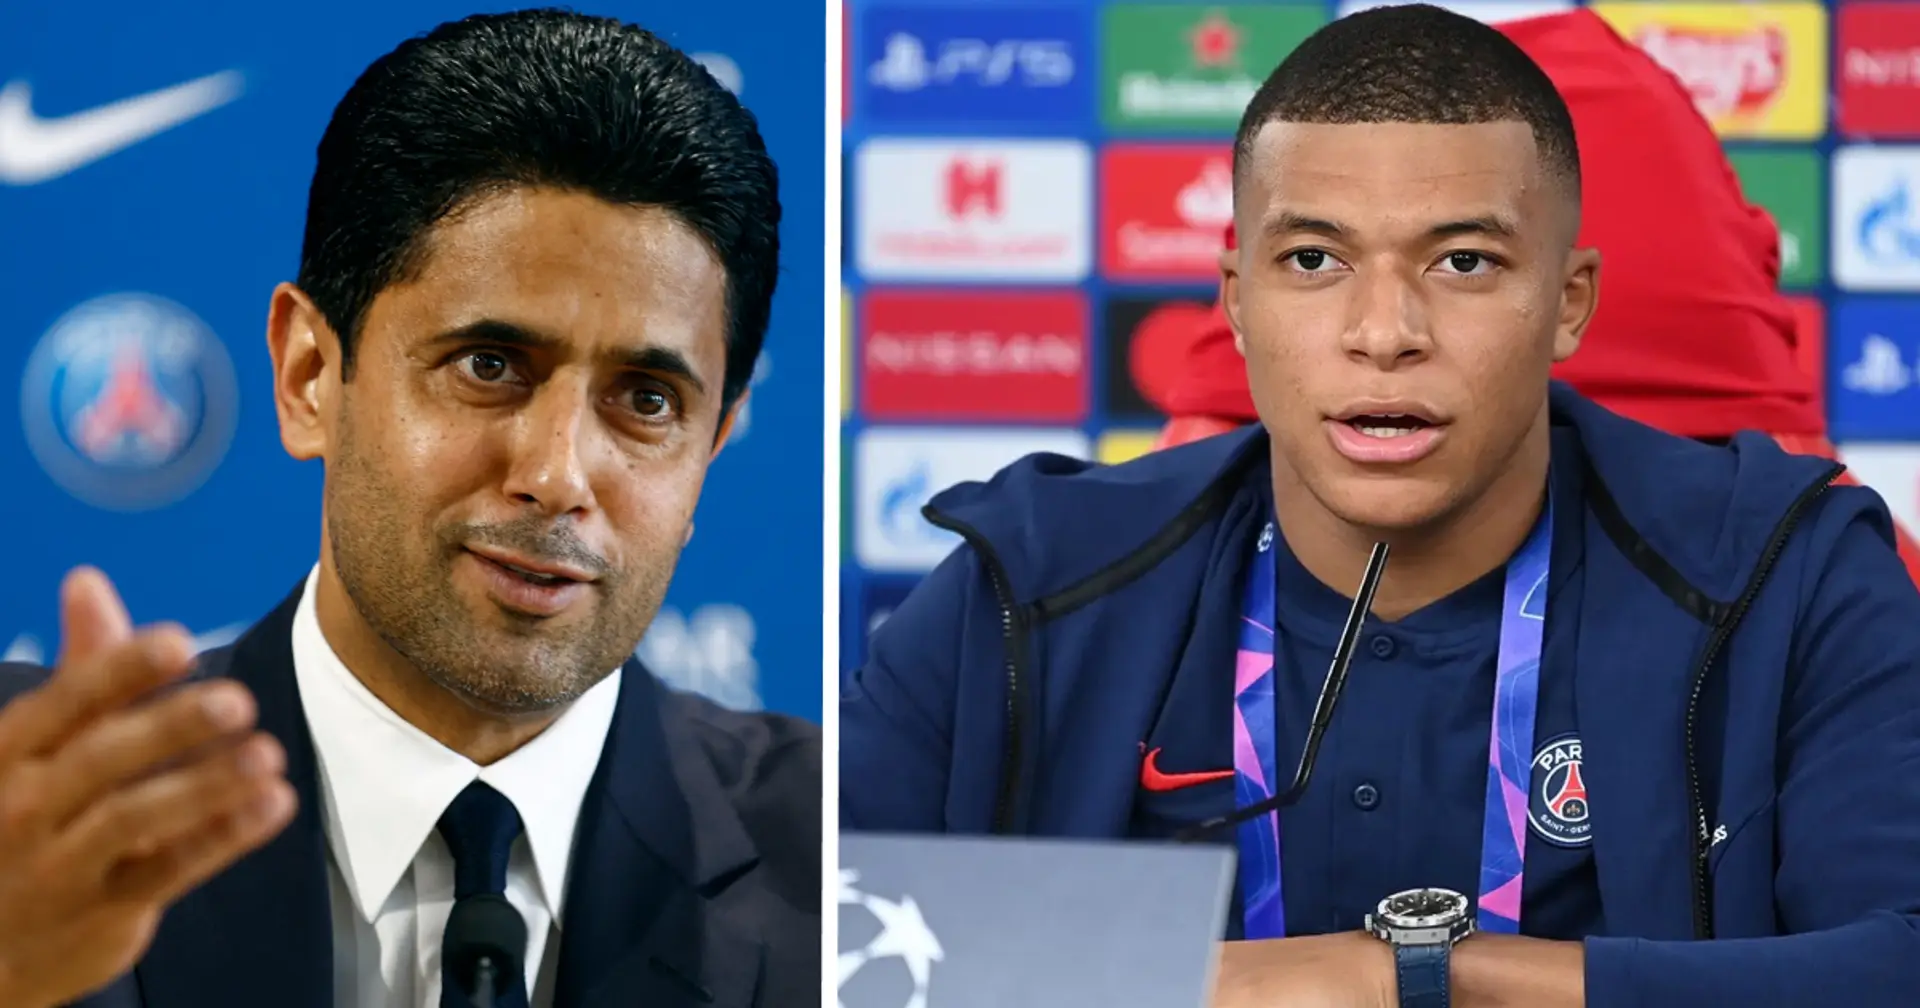 Mbappe's gentleman agreement with PSG revealed